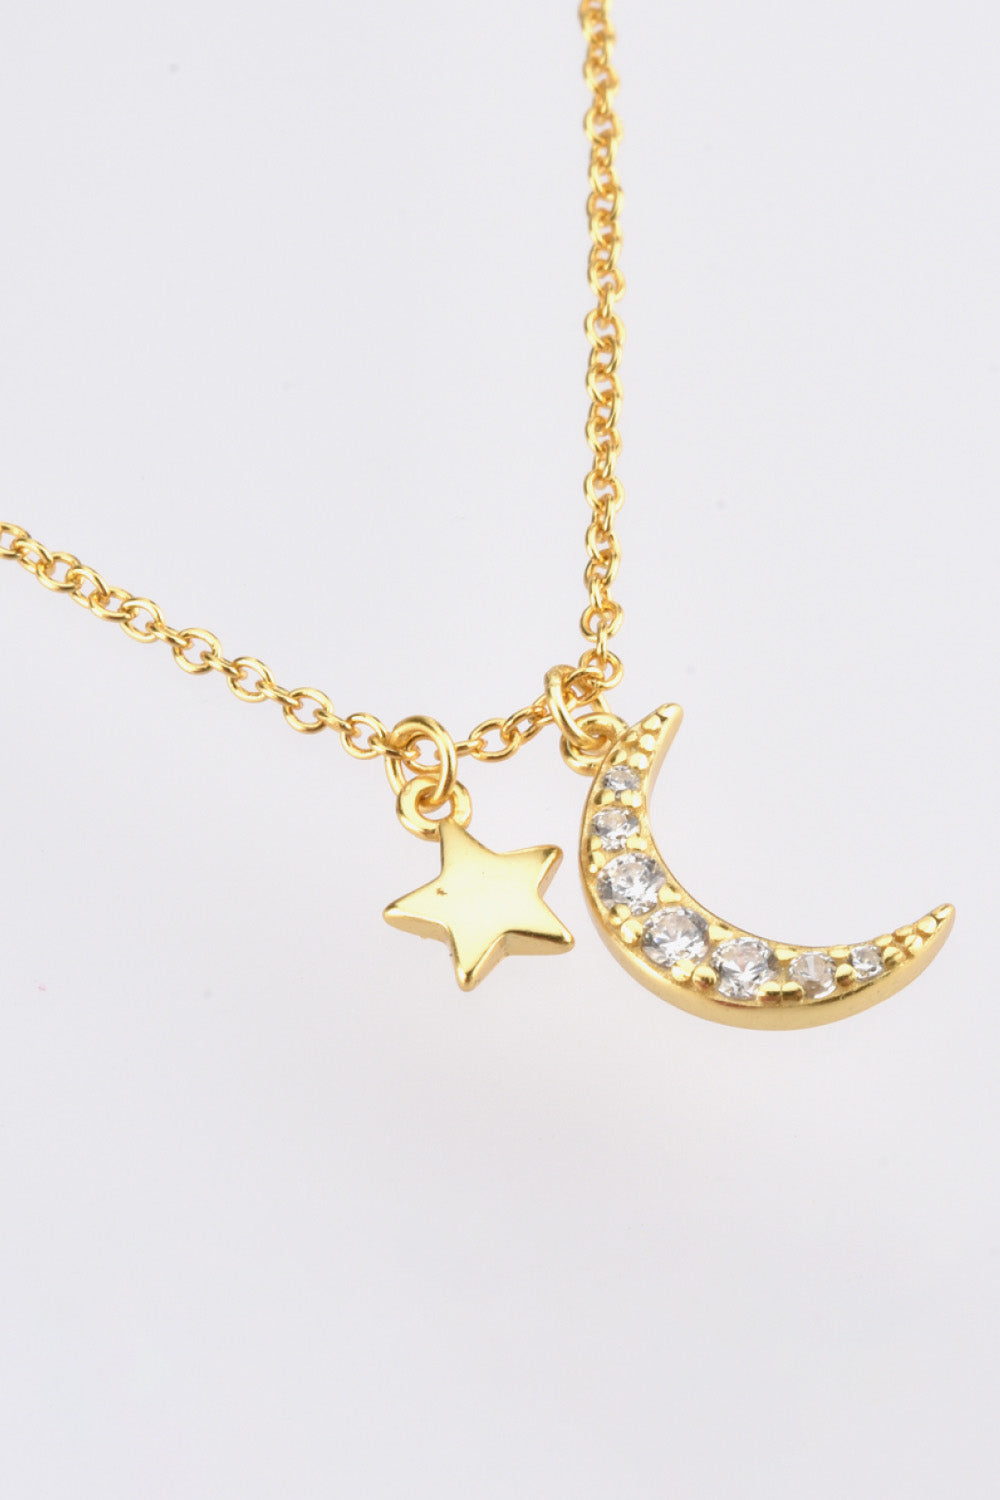 Zircon pendant necklace, star and moon design, celestial jewelry, fashion accessory, statement piece, elegant necklace, glamorous accessory, celestial theme, dainty details, versatile necklace